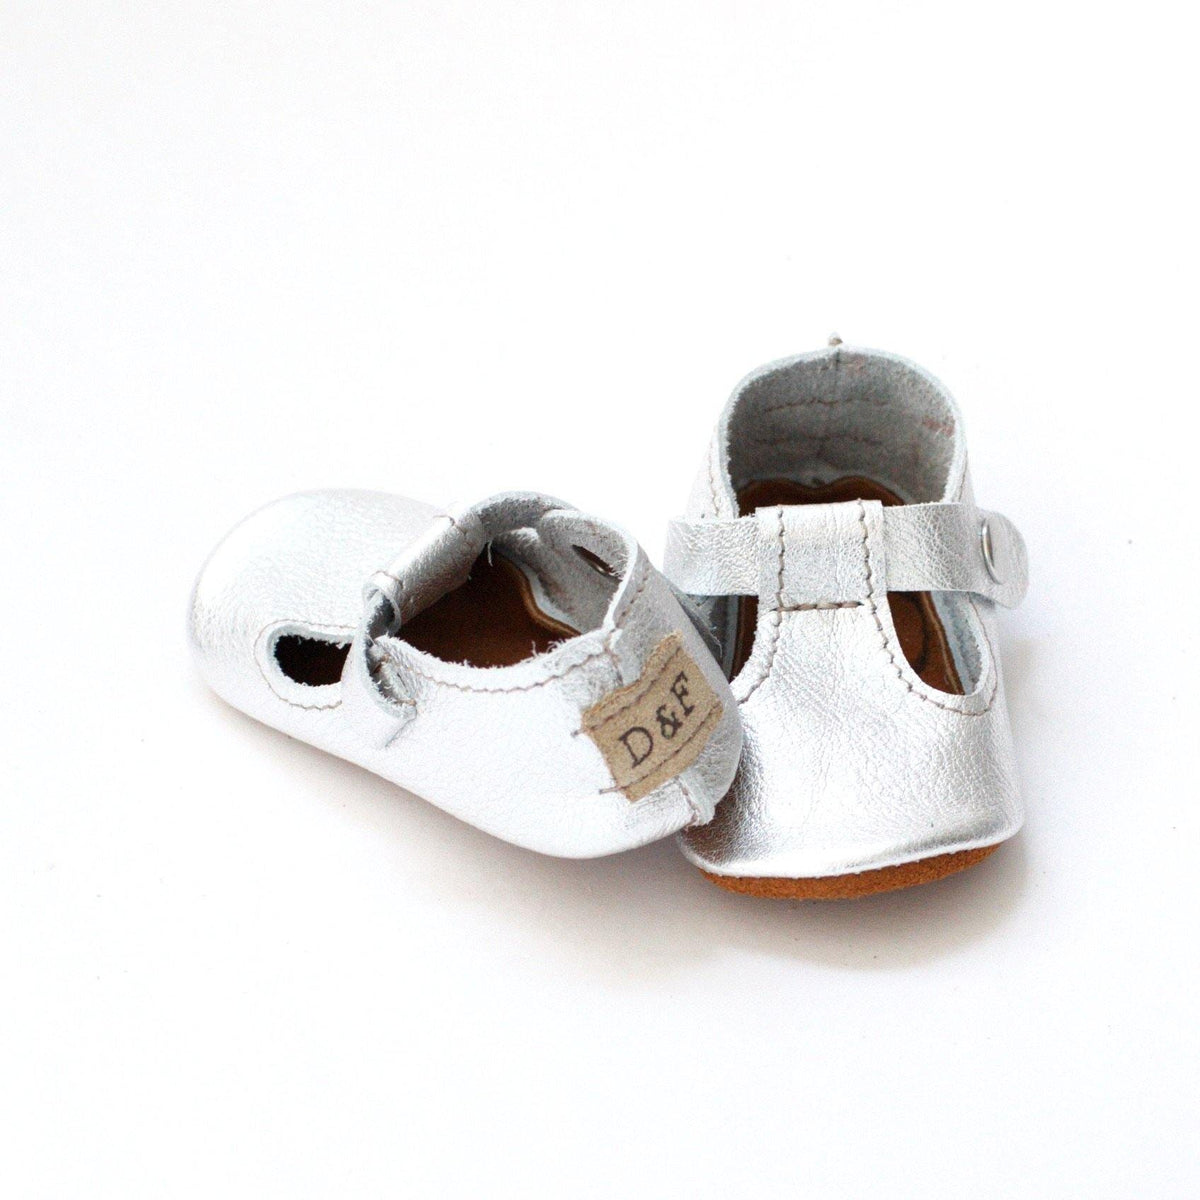 Duchess and Fox Silver T-Straps handmade barefoot shoes